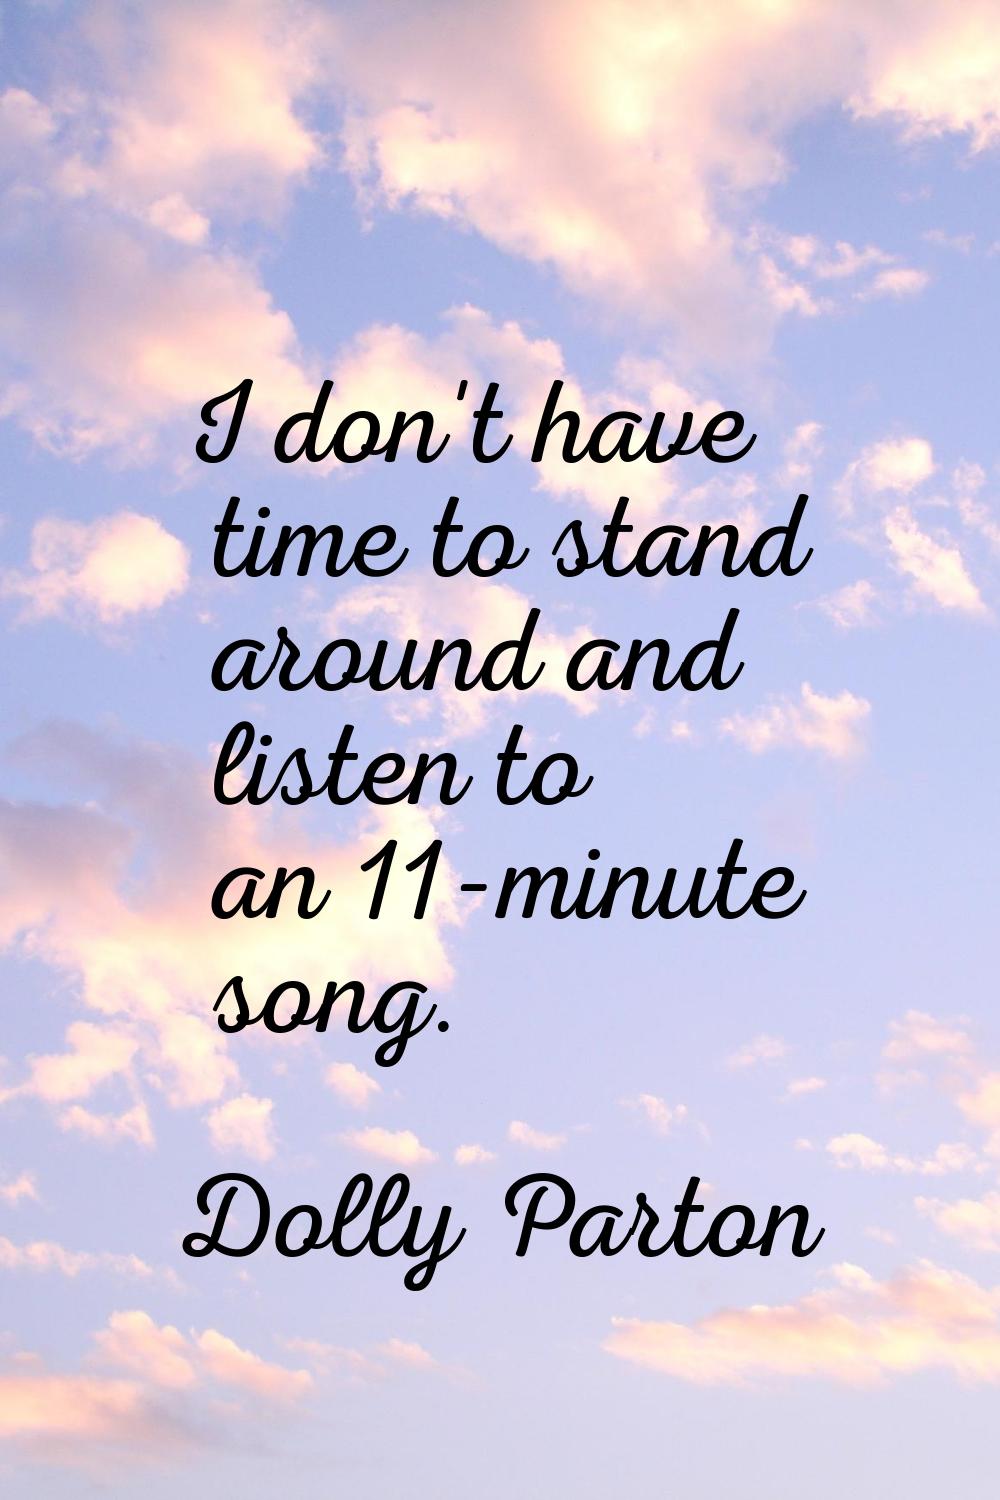 I don't have time to stand around and listen to an 11-minute song.